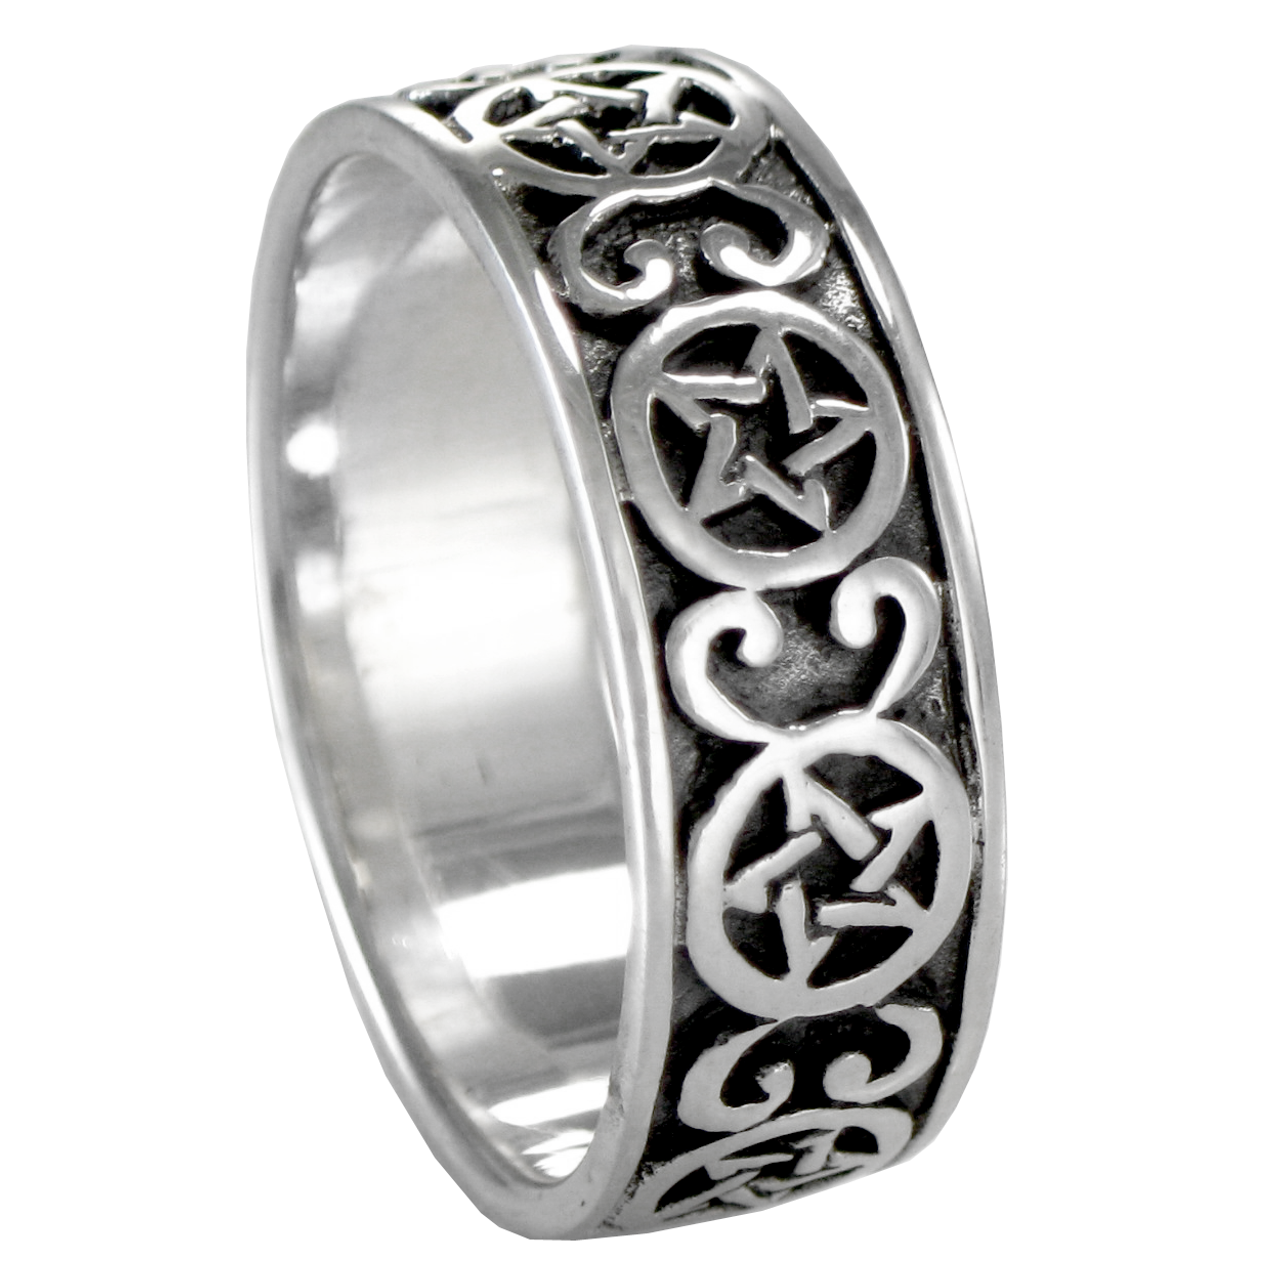 Silver Celtic Knot Pentacle Ring Band - Moonlight Mysteries Wholesale